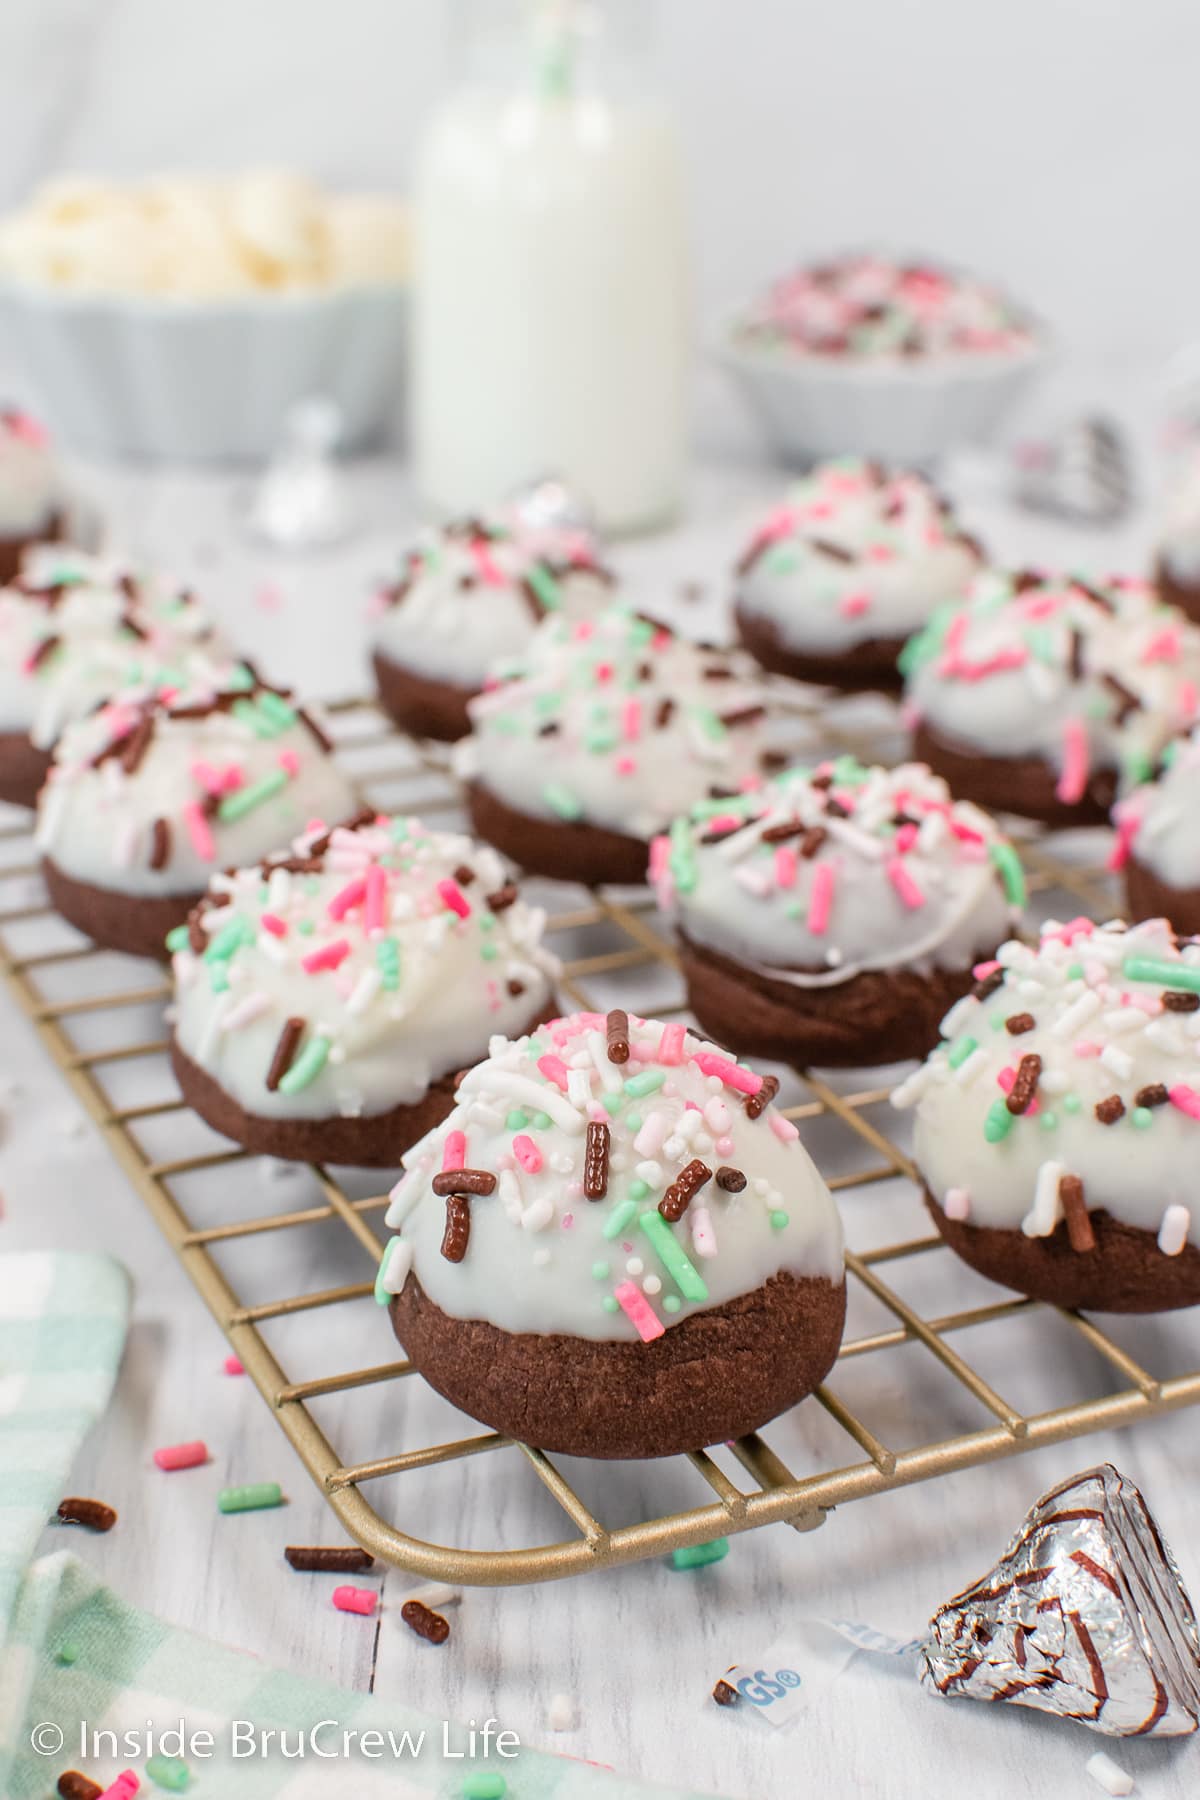 Chocolate bon bon cookies with white chocolate and sprinkles on top.